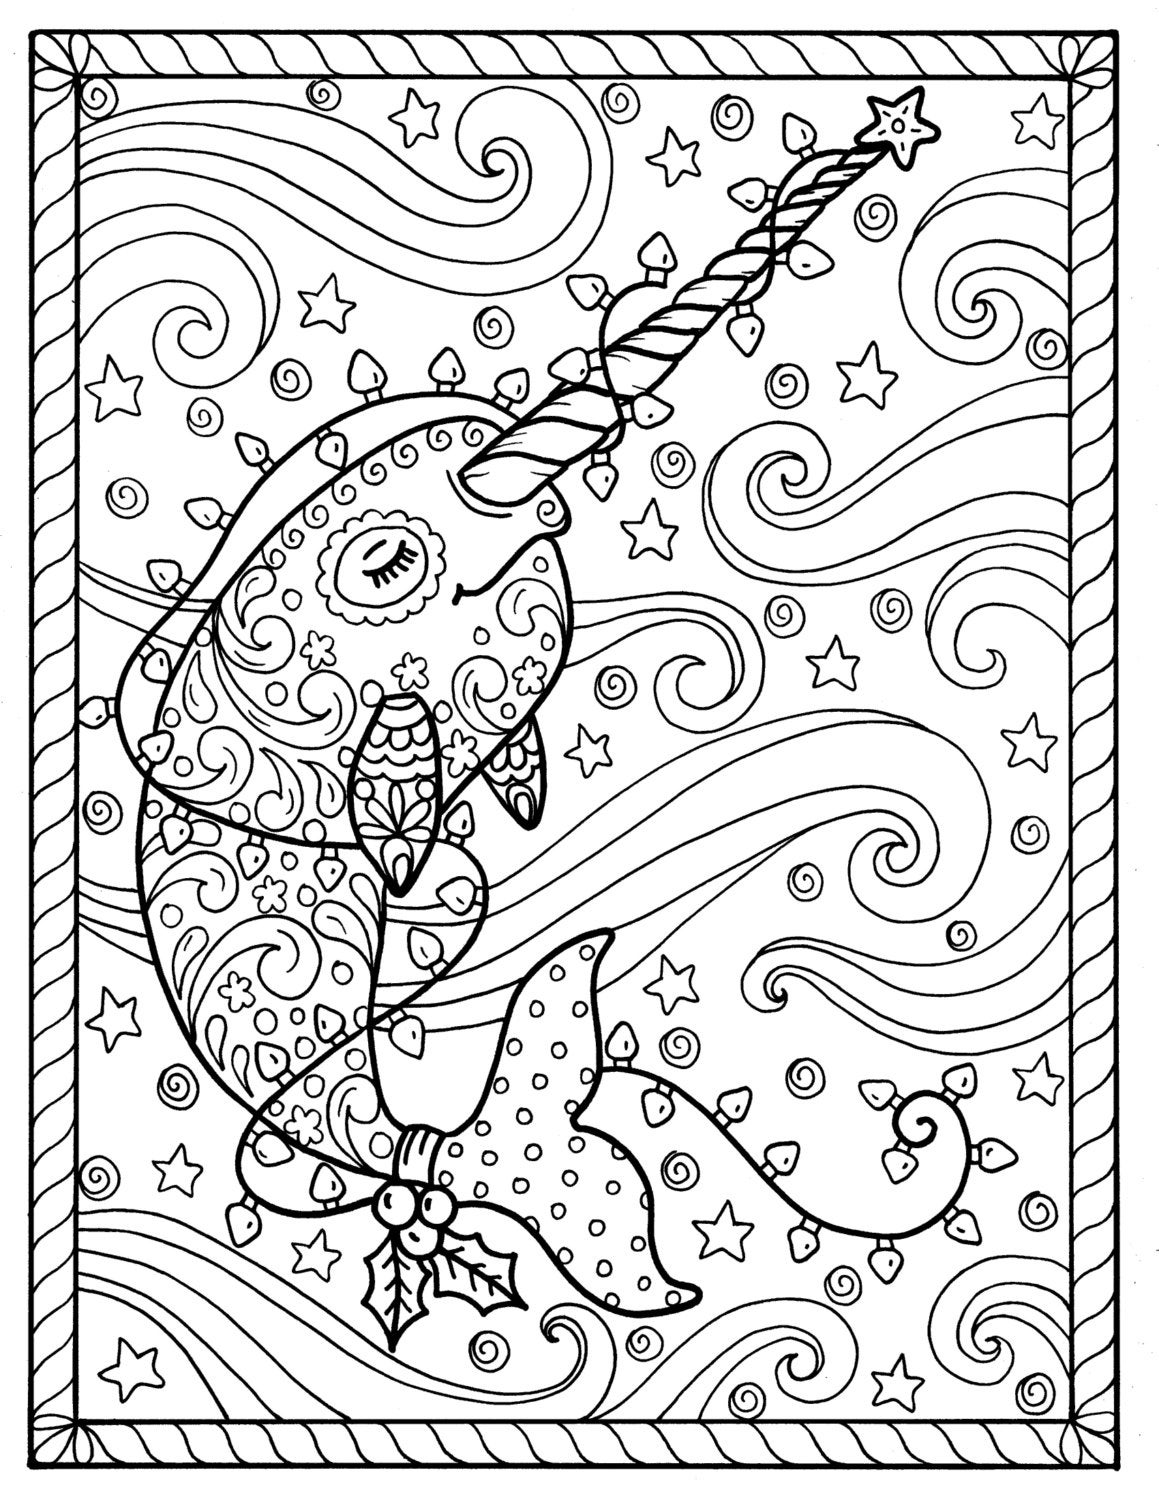 Narwhal christmas coloring pages adult coloring books digi stamp whales digital files jpg